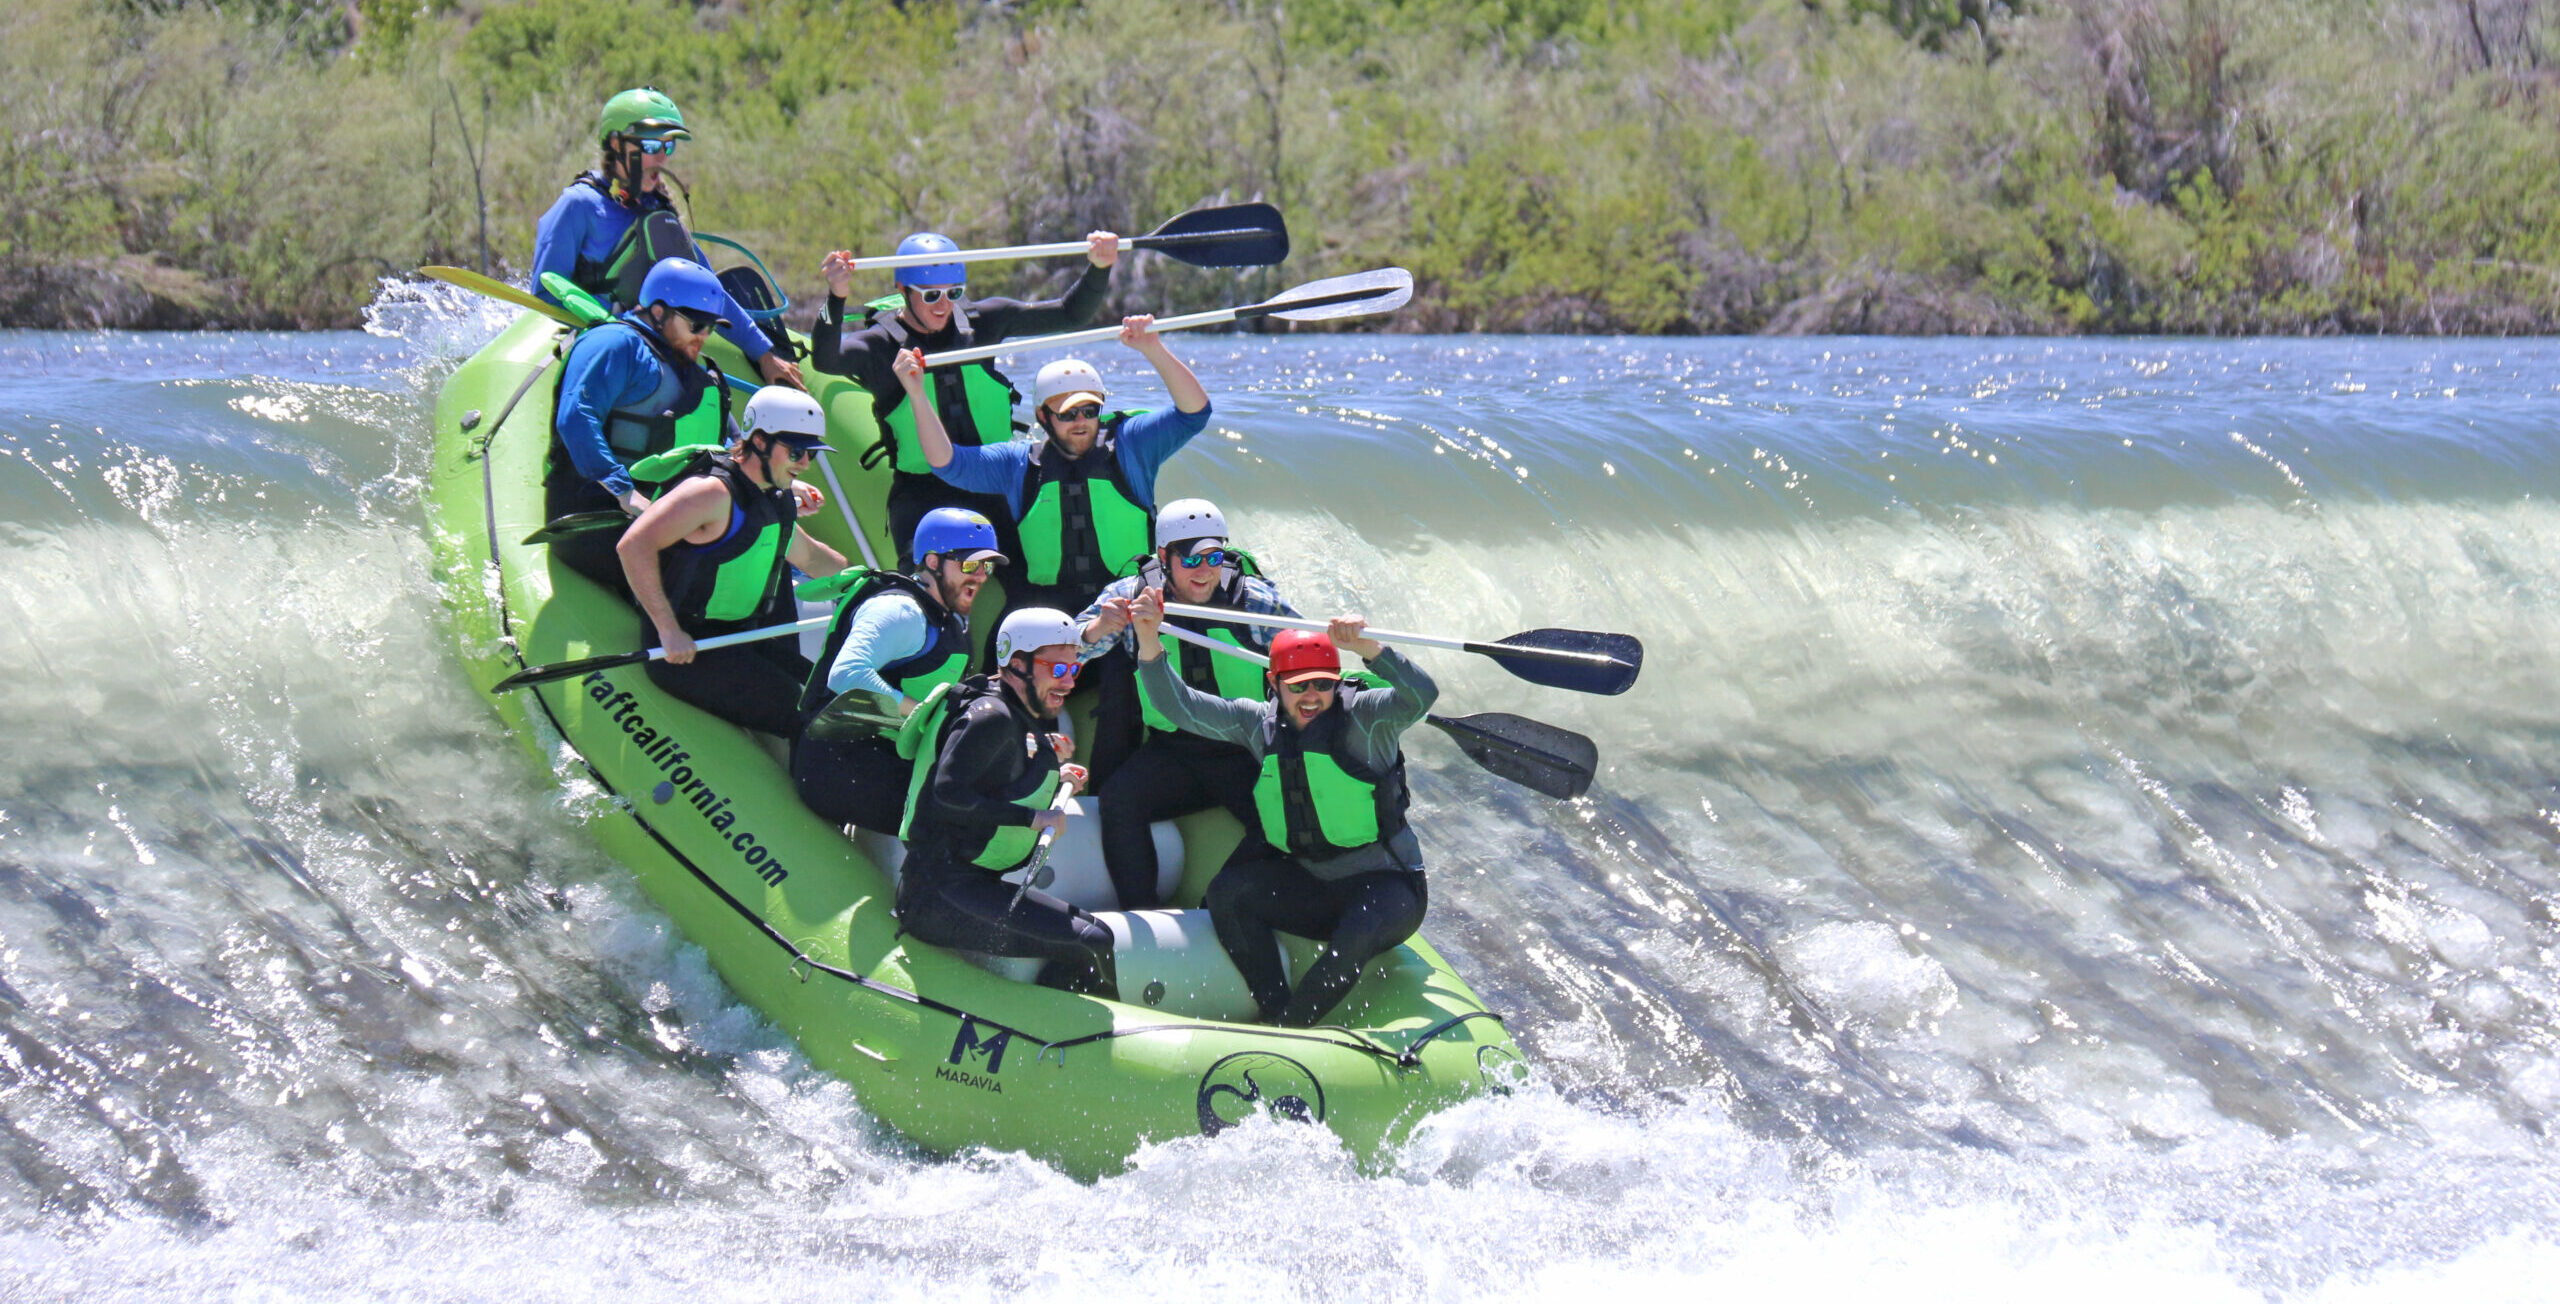 Truckee River Is Open for Guided Whitewater Rafting this Summer with Steady River Flow